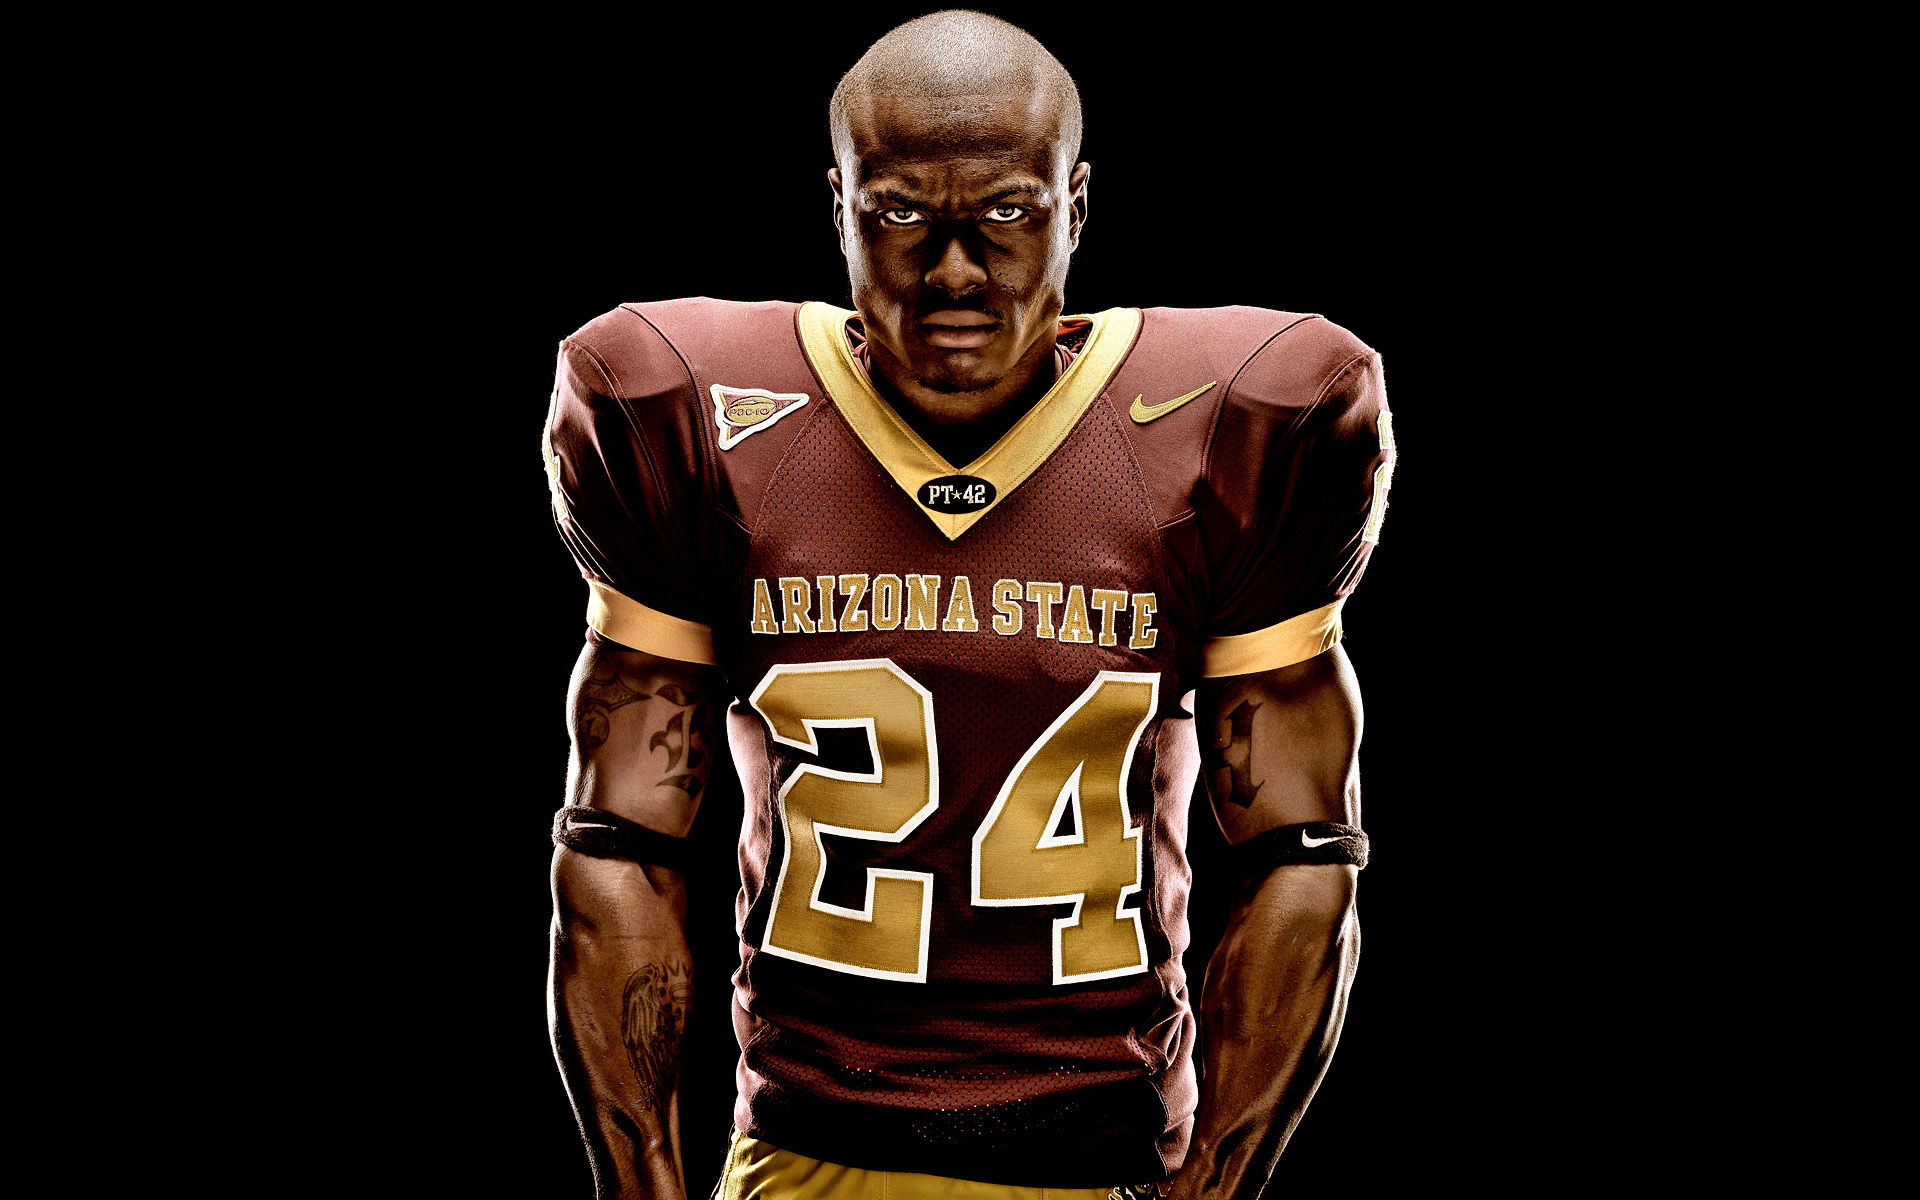 Football player intens portrait by Blair Bunting